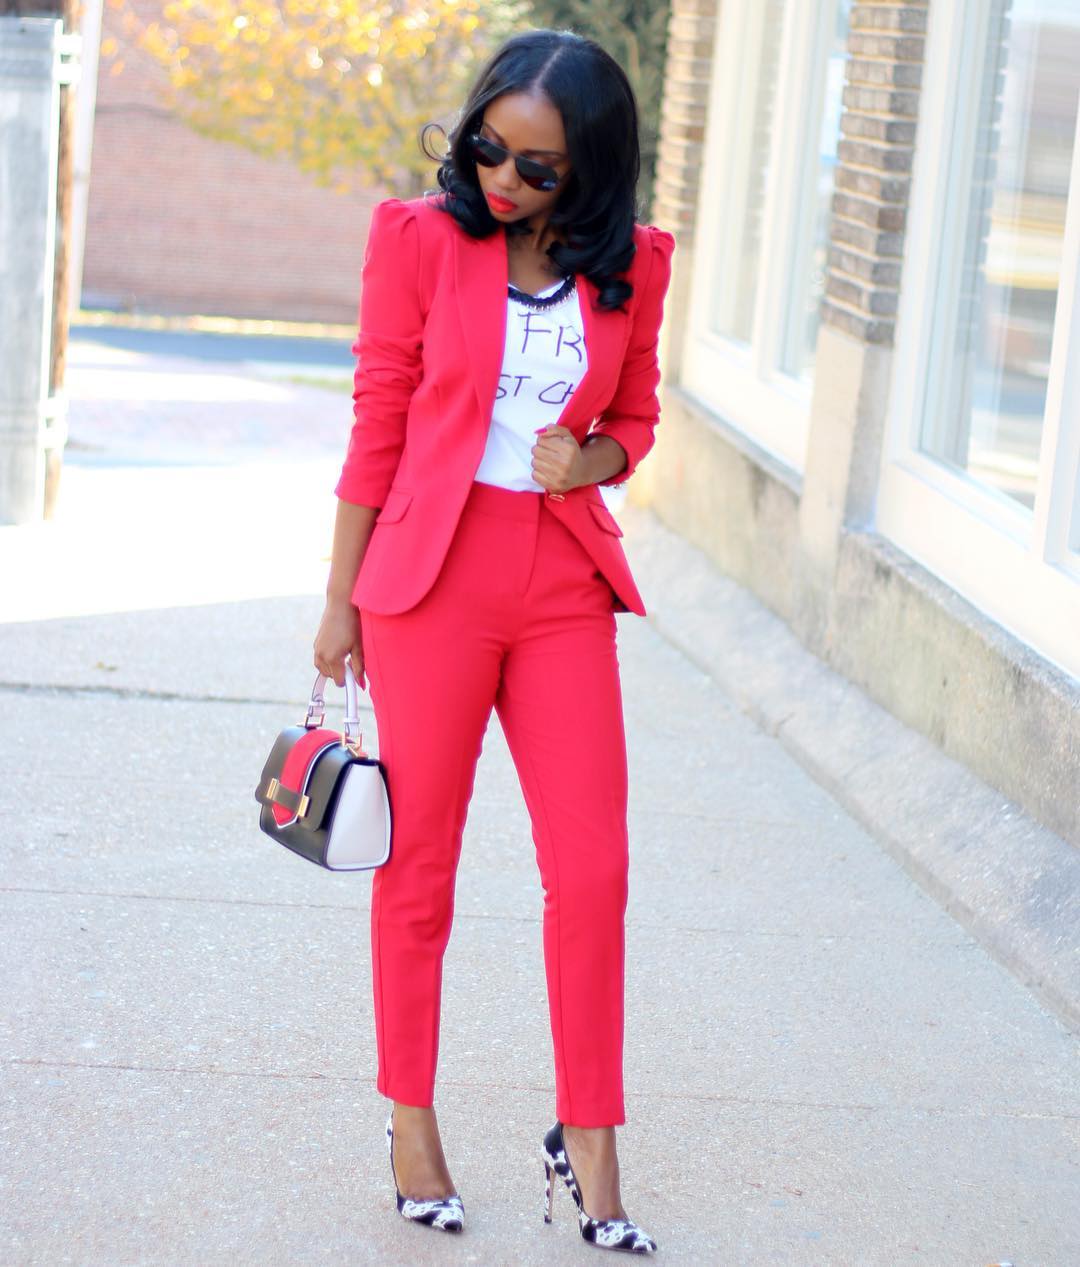 how-to-wear-red-for-festive-holiday-holiday-fashionpolicenigeria-4